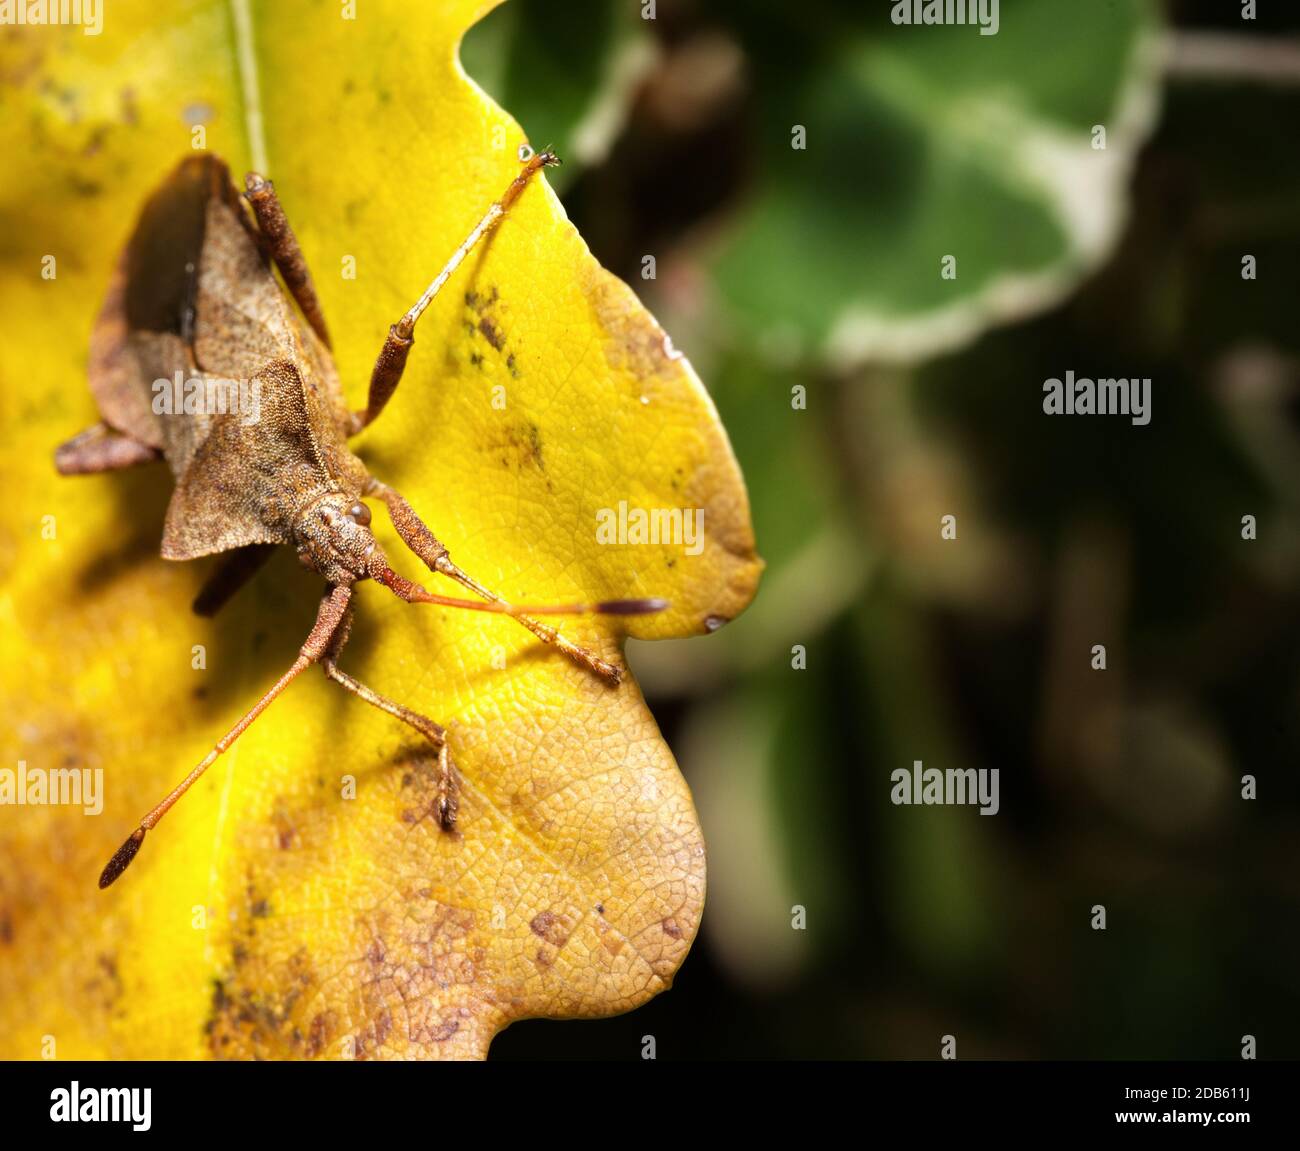 dock bug on leaf in close up Stock Photo